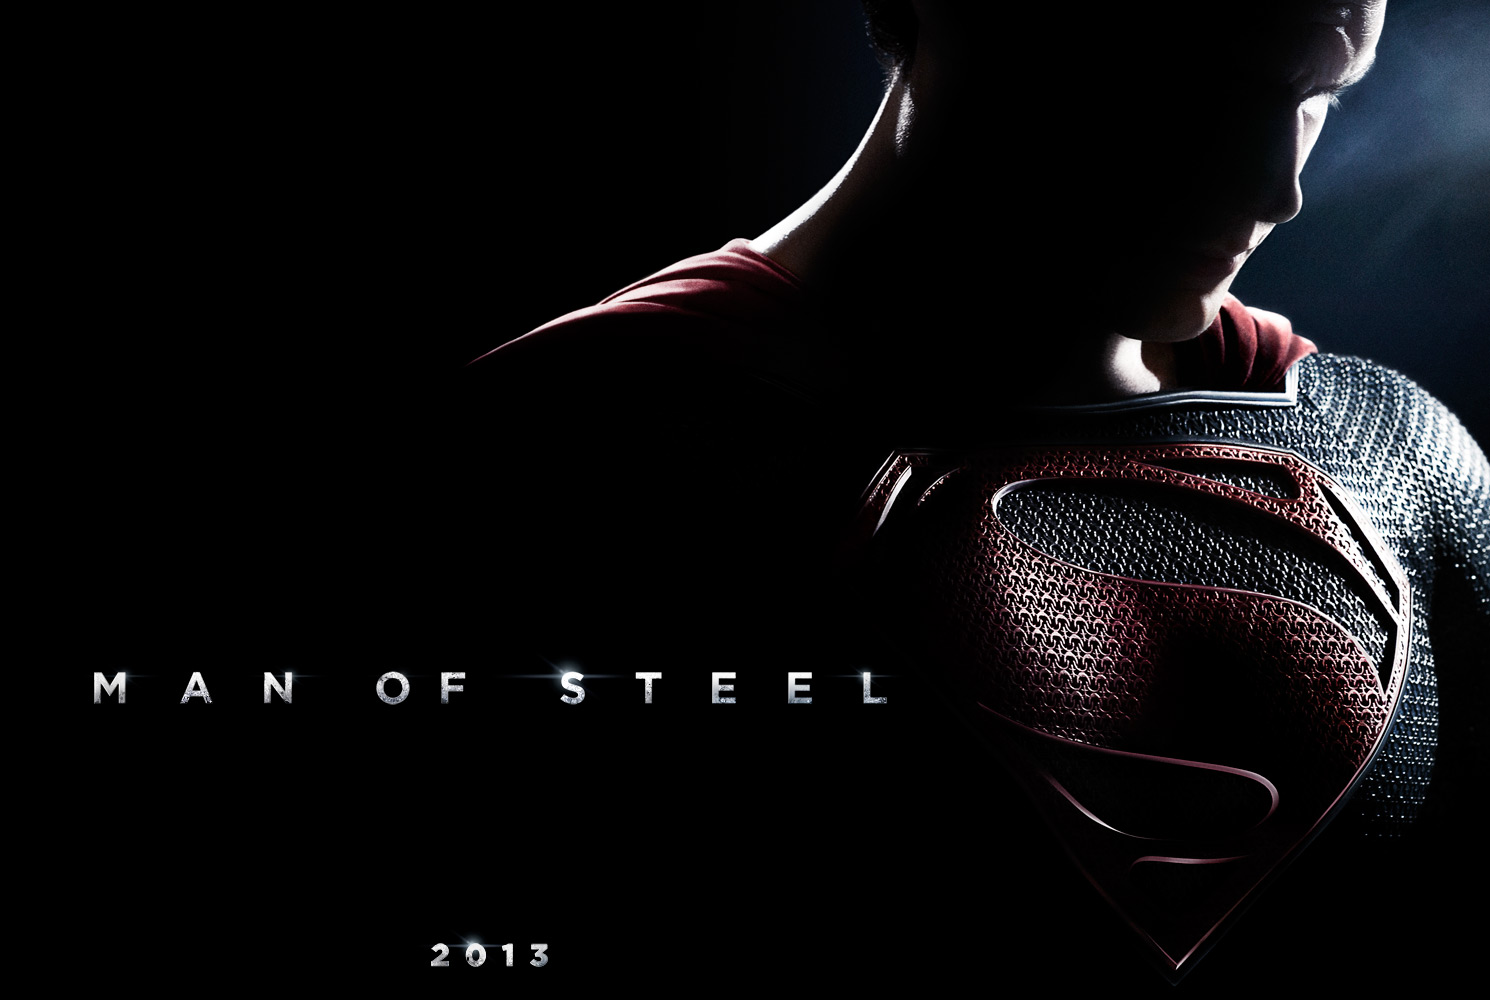 Movie News: New Man of Steel character posters like the lens flare